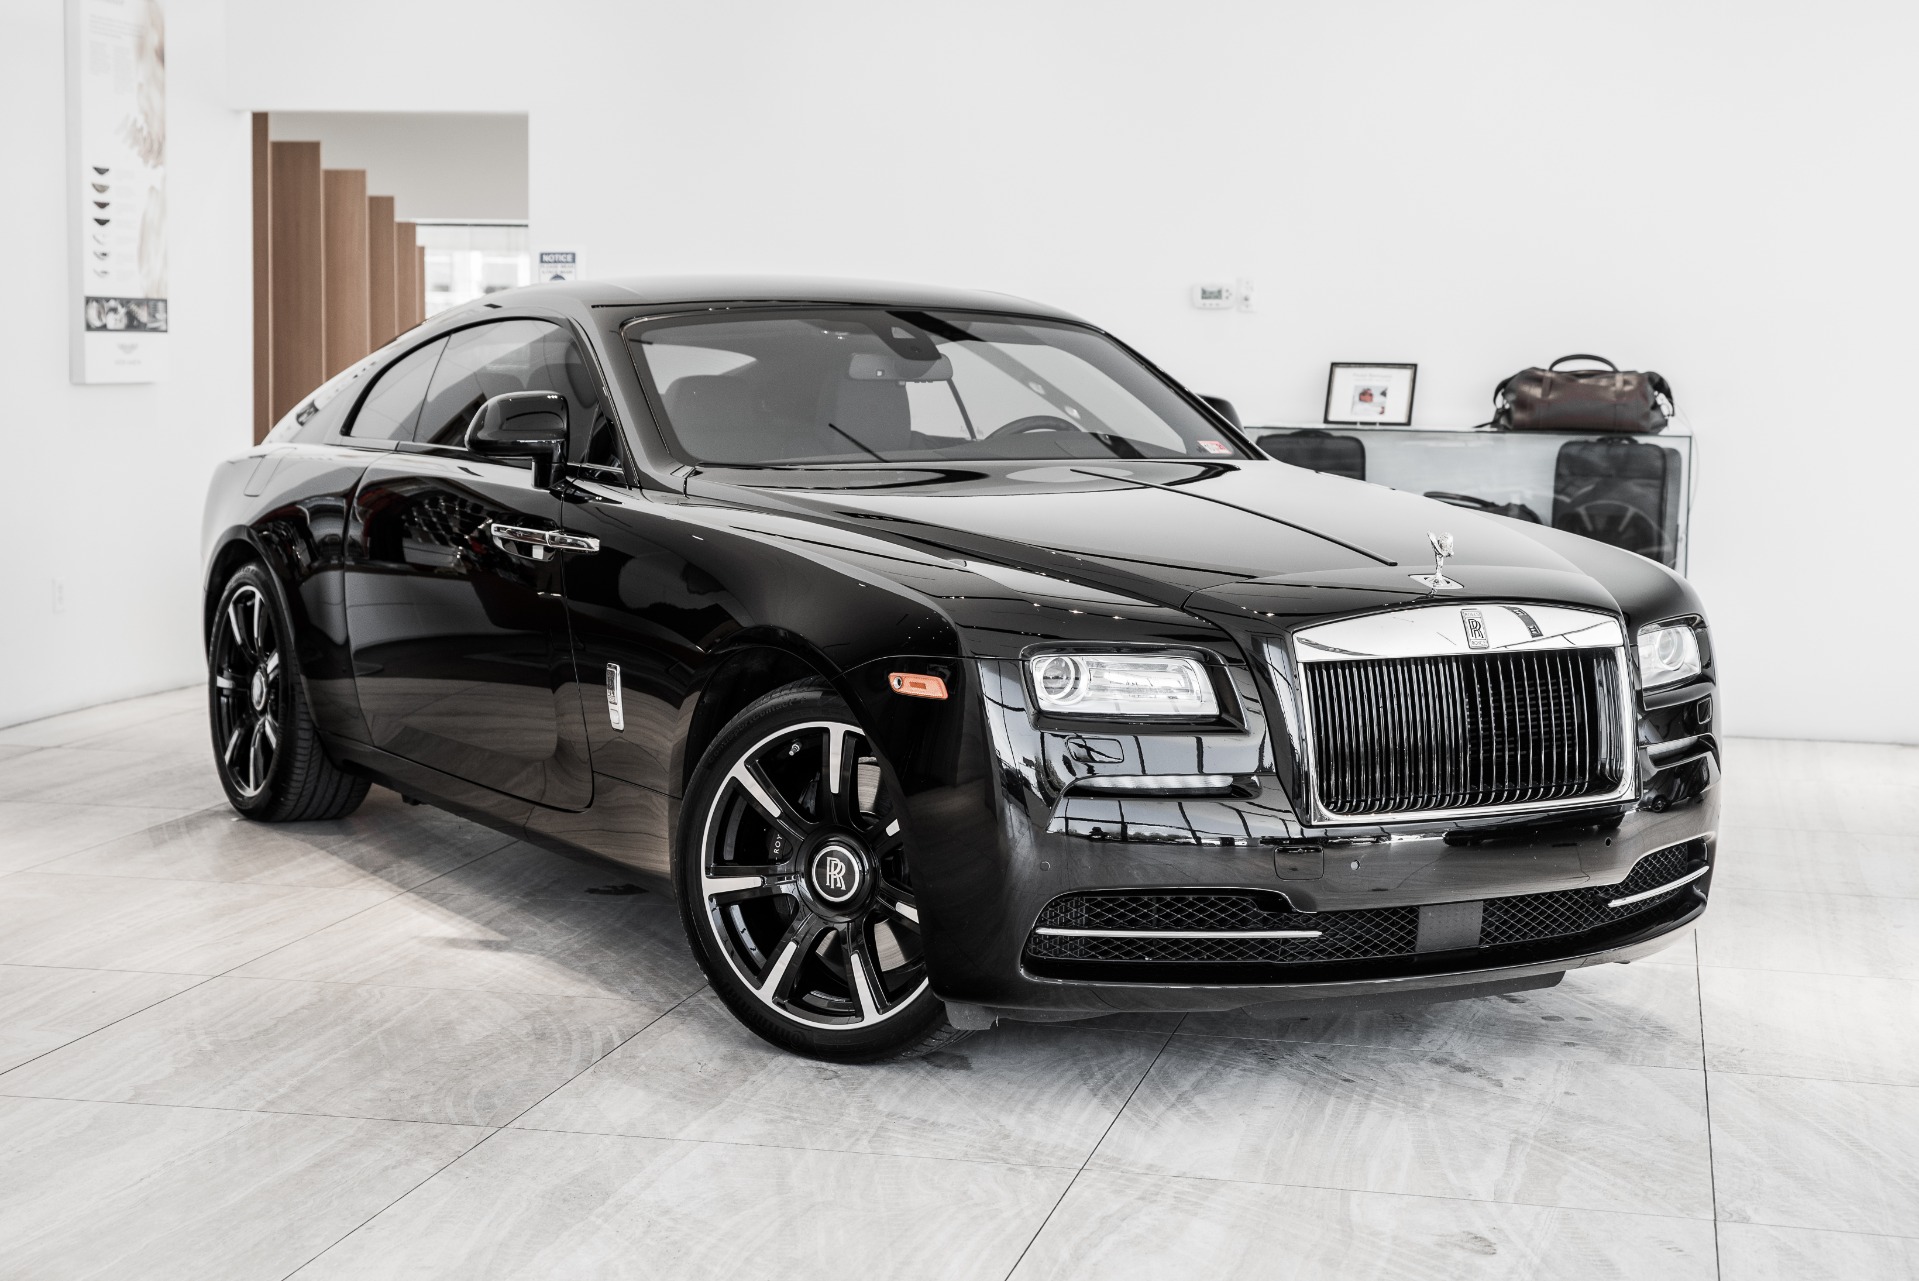 For Sale RollsRoyce Wraith 2016 offered for 170000